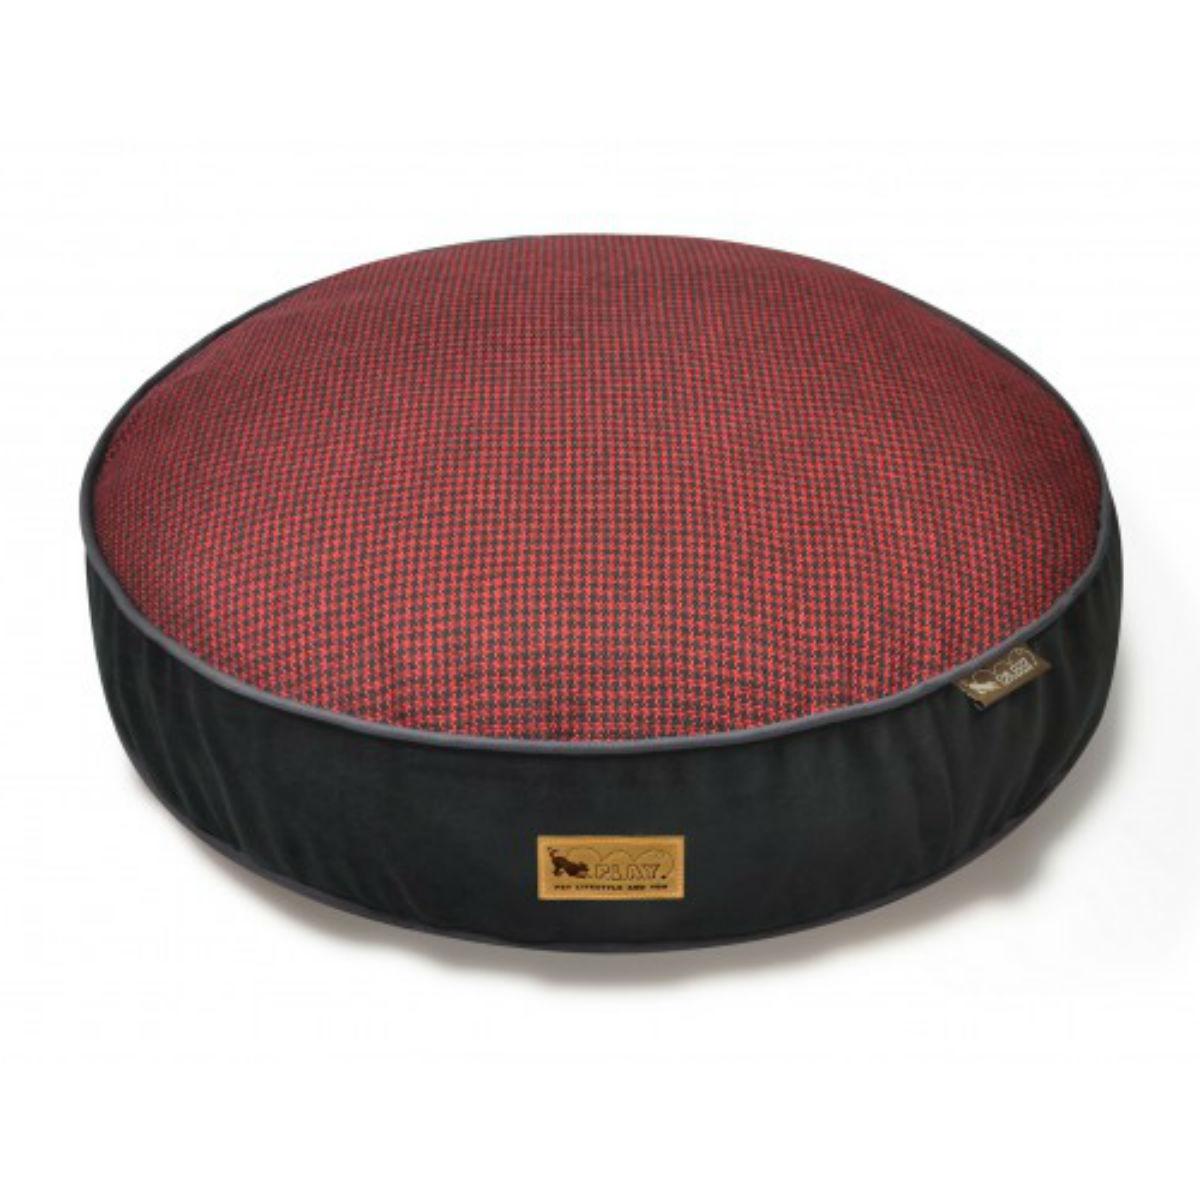 P.L.A.Y. Houndstooth Round Dog Bed - Cayenne Red